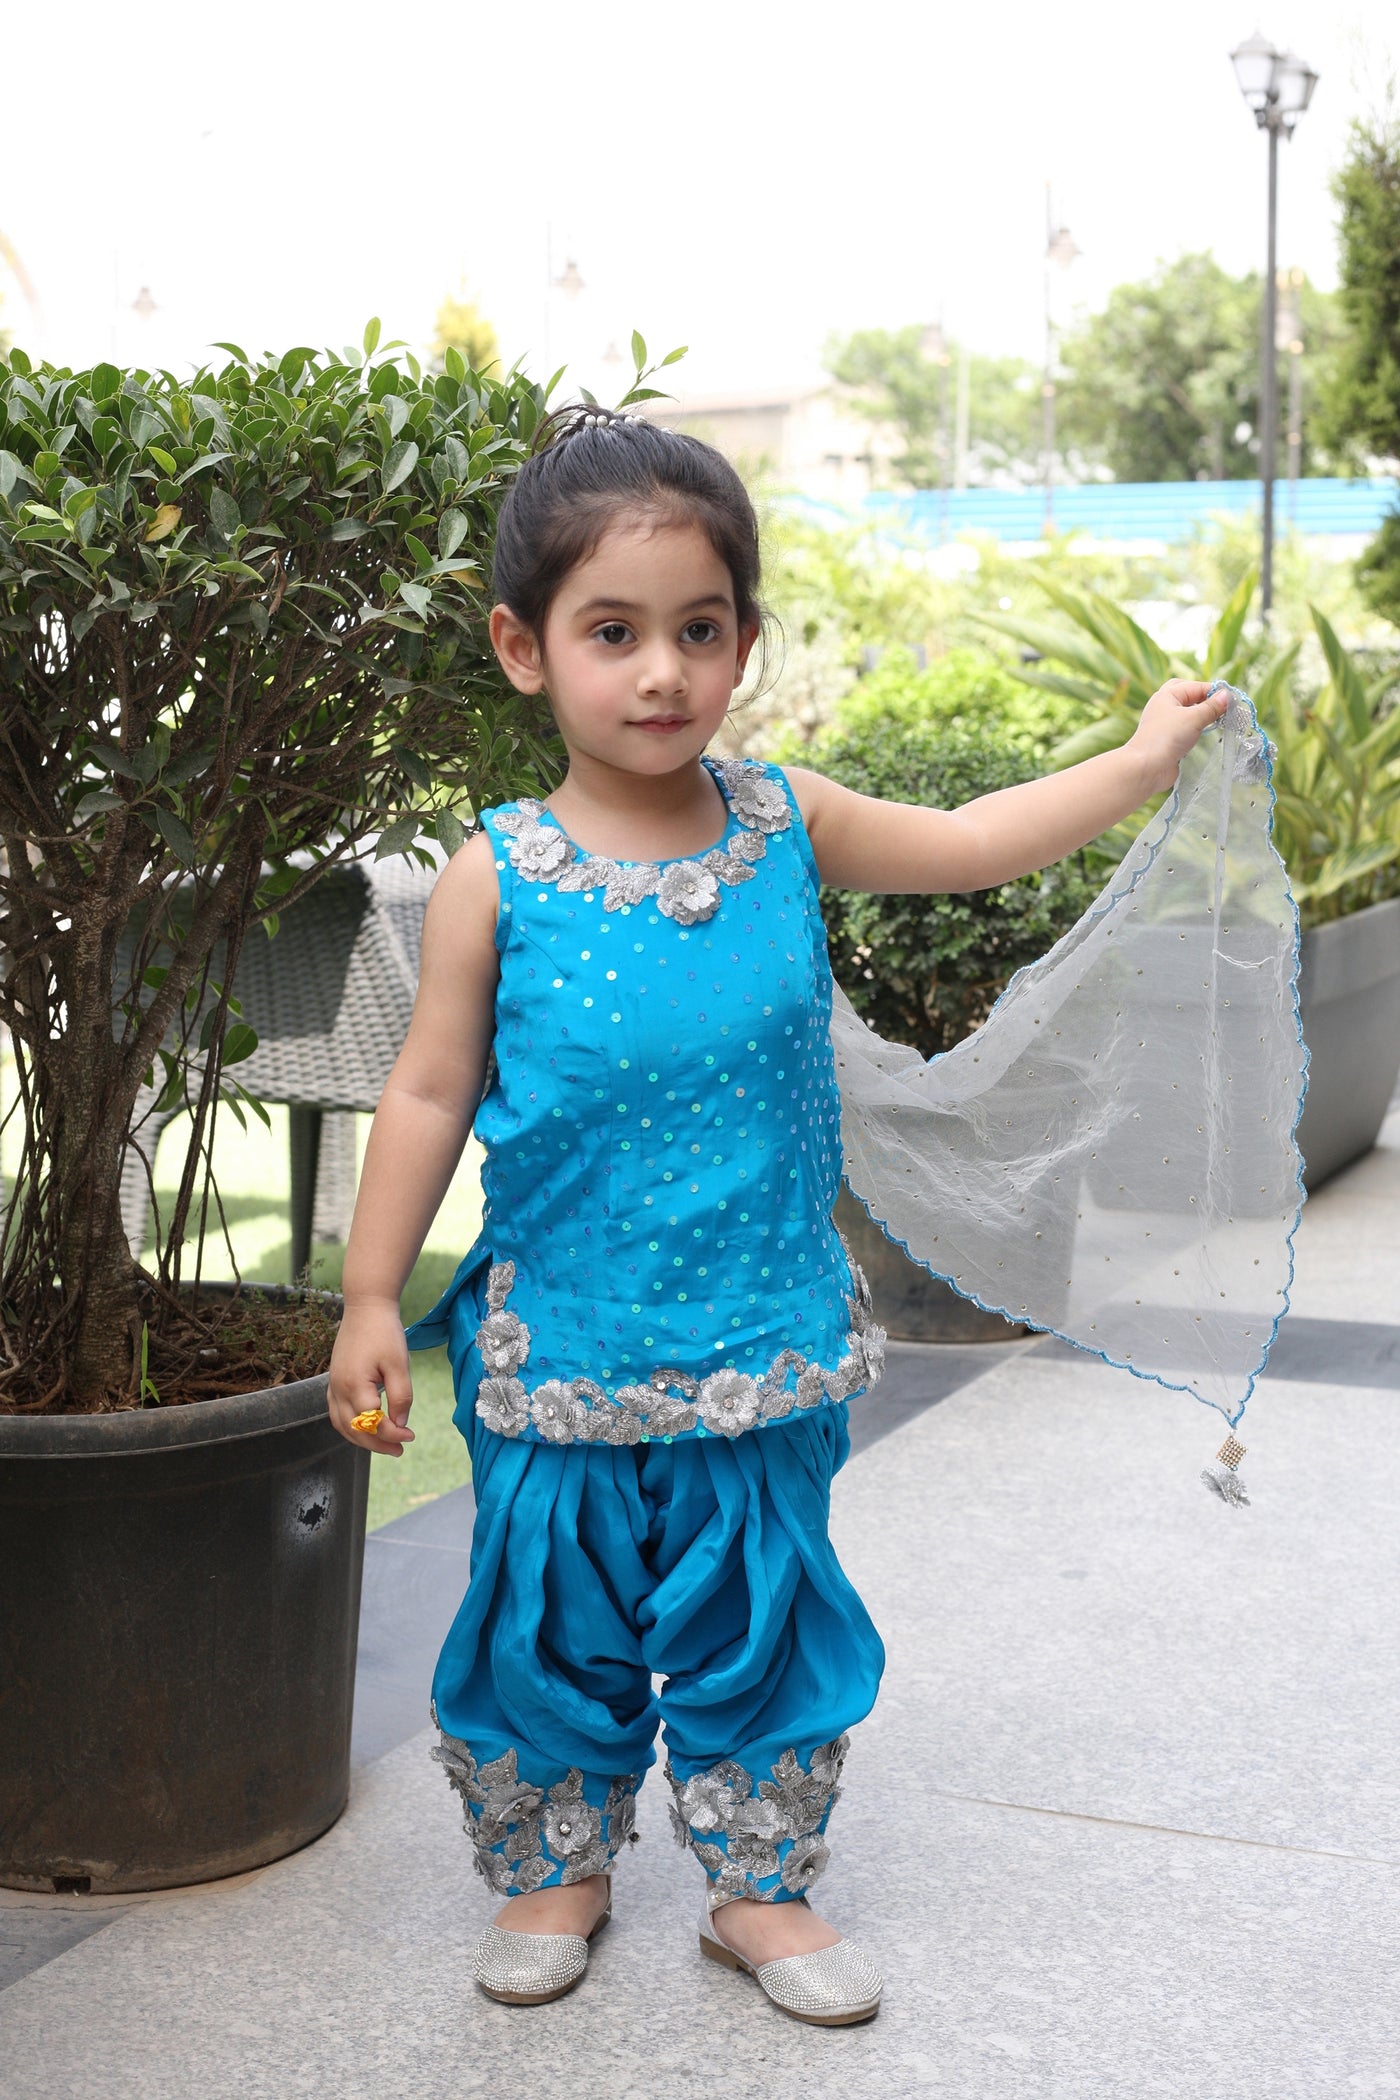 Girls' Cerulean Blue Patiala Suit Indian Clothing in Denver, CO, Aurora, CO, Boulder, CO, Fort Collins, CO, Colorado Springs, CO, Parker, CO, Highlands Ranch, CO, Cherry Creek, CO, Centennial, CO, and Longmont, CO. NATIONWIDE SHIPPING USA- India Fashion X